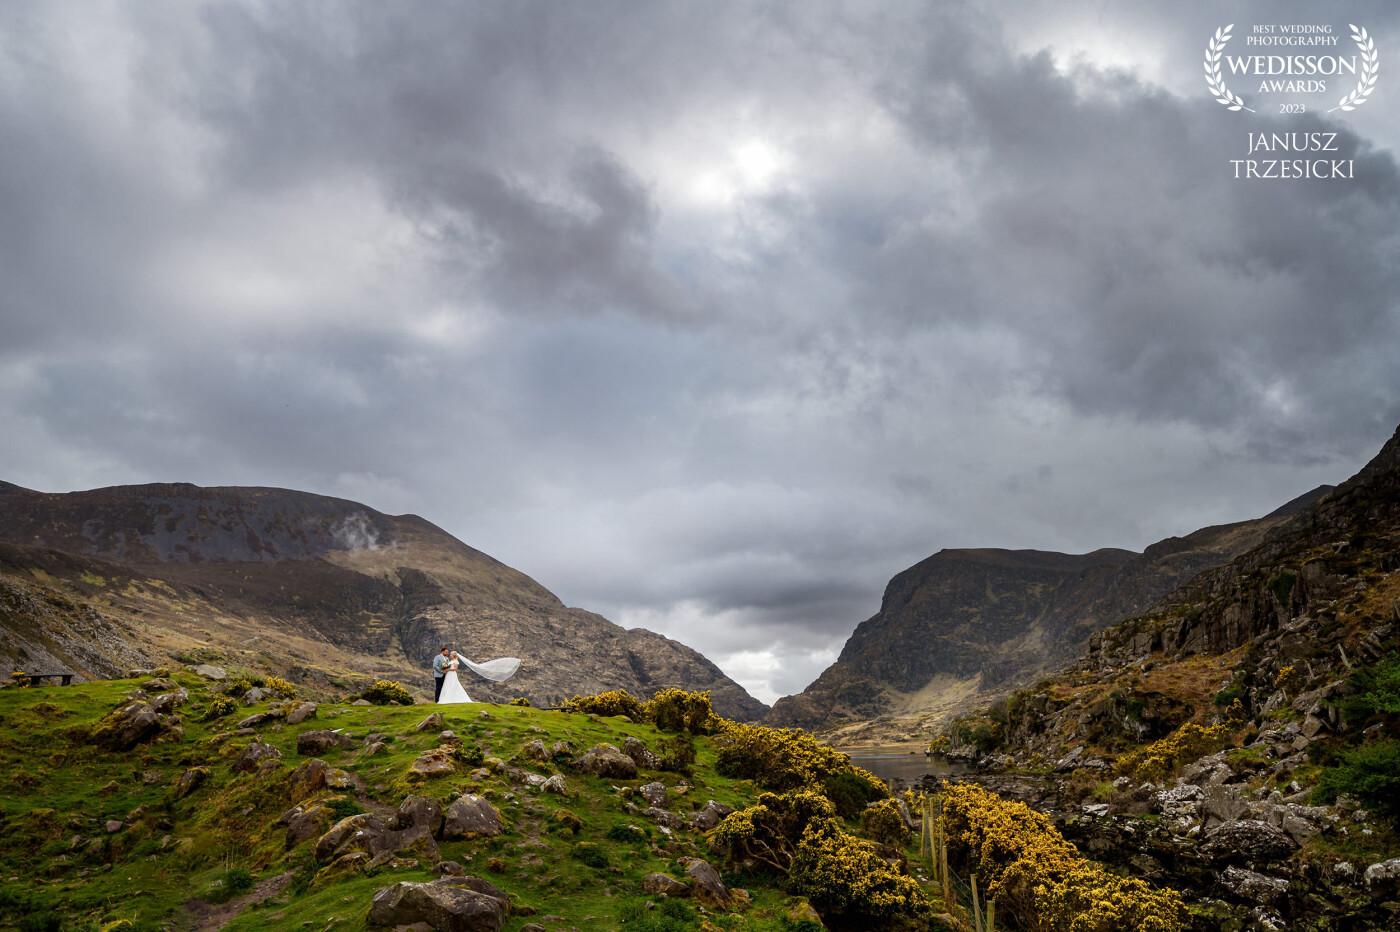 It was a bit of a hassle and risk about the weather to go to this beautiful location on the wedding day for 10 min photo shoot but it was worth it. A scenic view and the couple posed in a strong point of the composition.